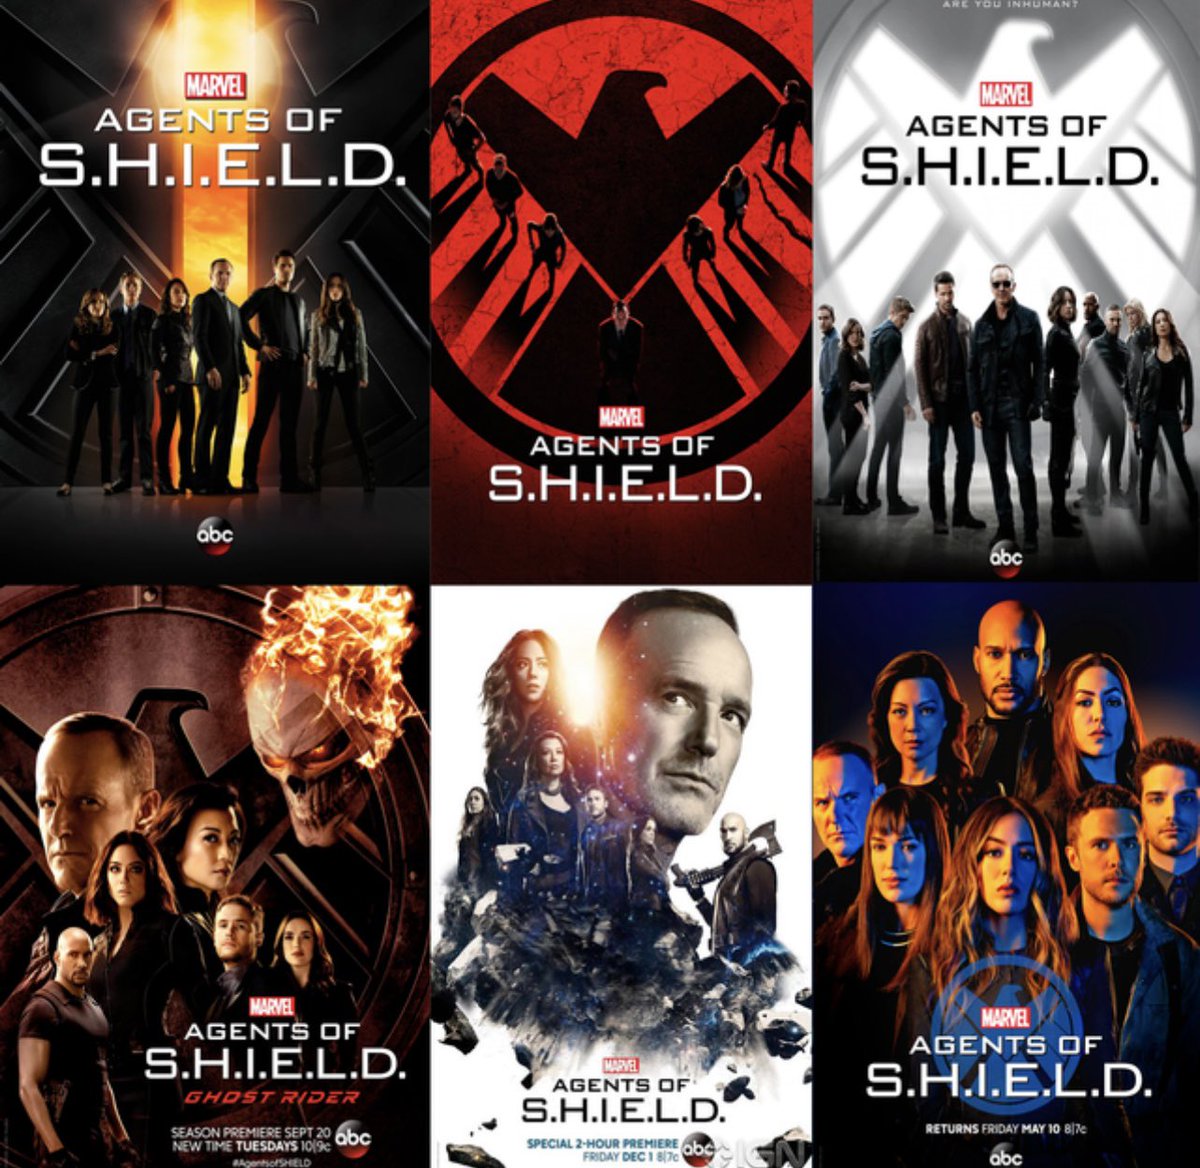 A thread of Agents of Shield questions